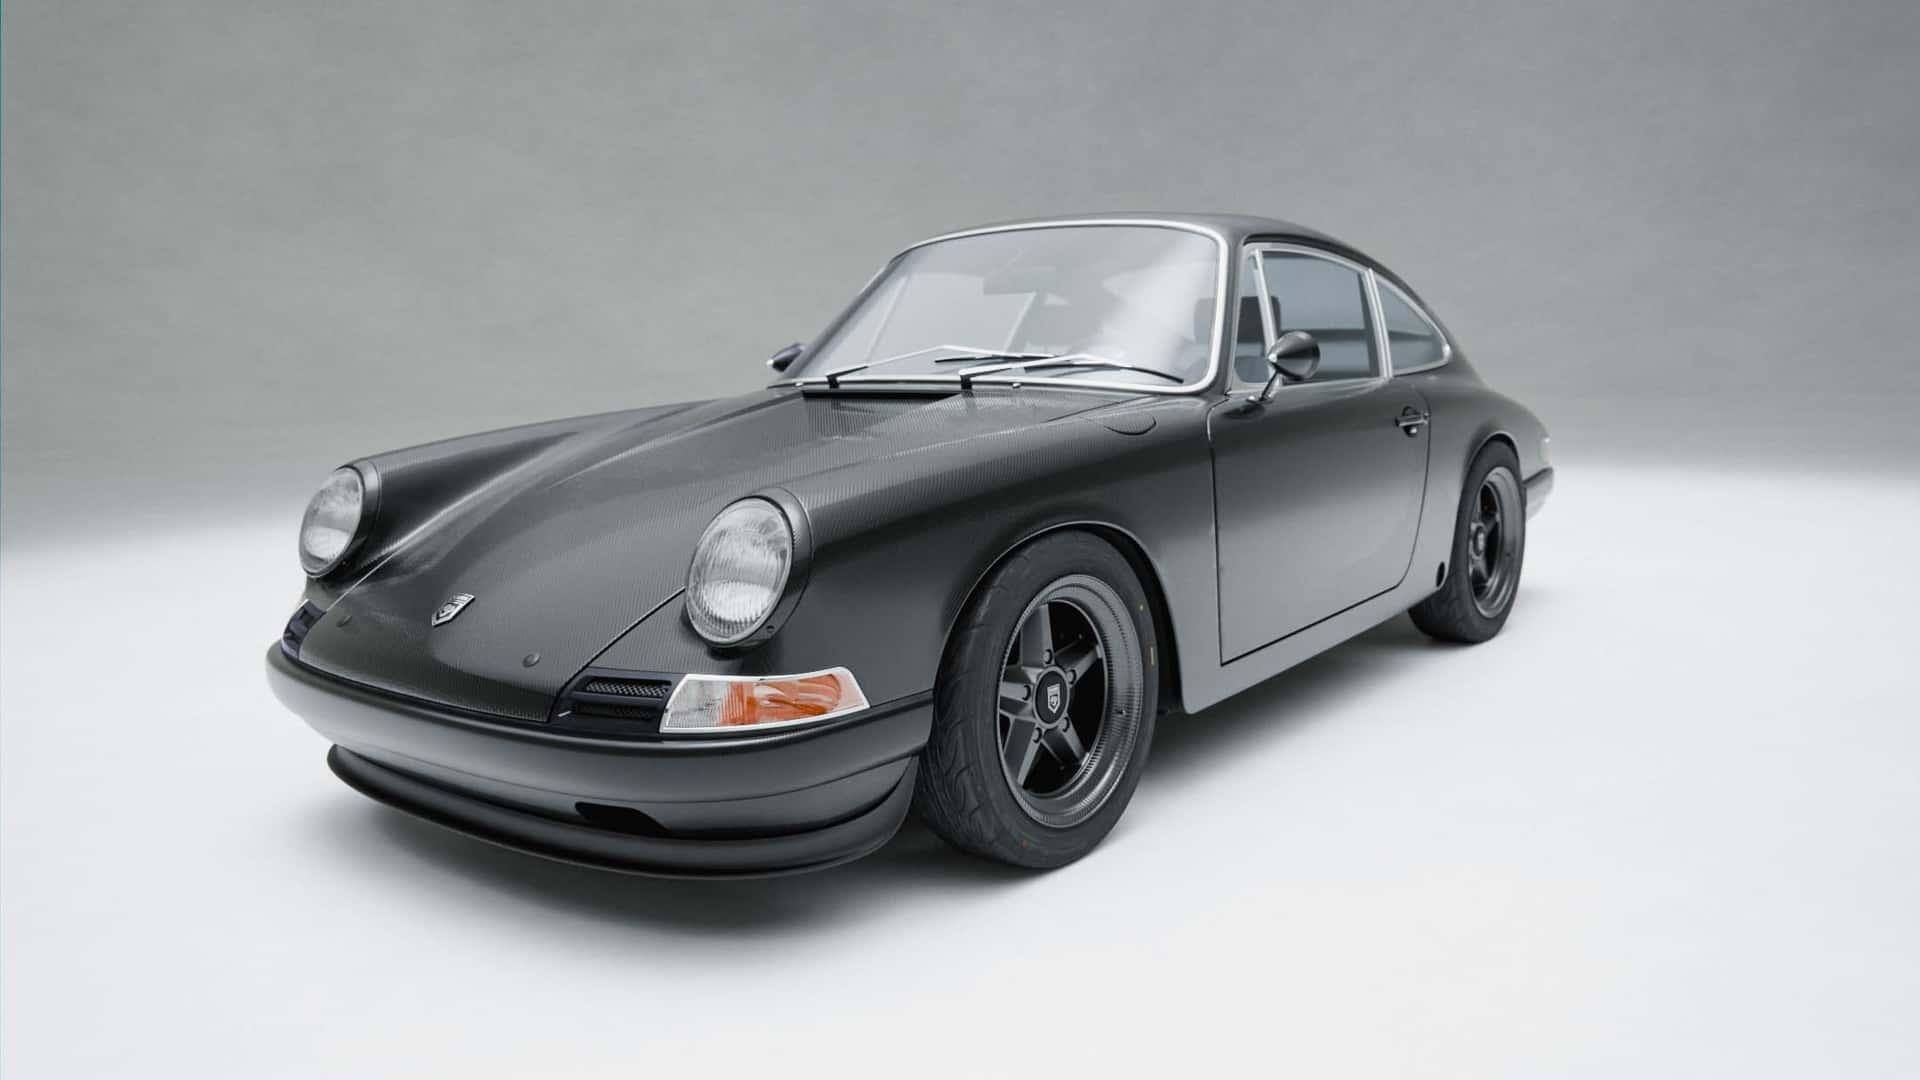 Porsche 912 with full carbon-fiber body available for Rs. 3.63cr